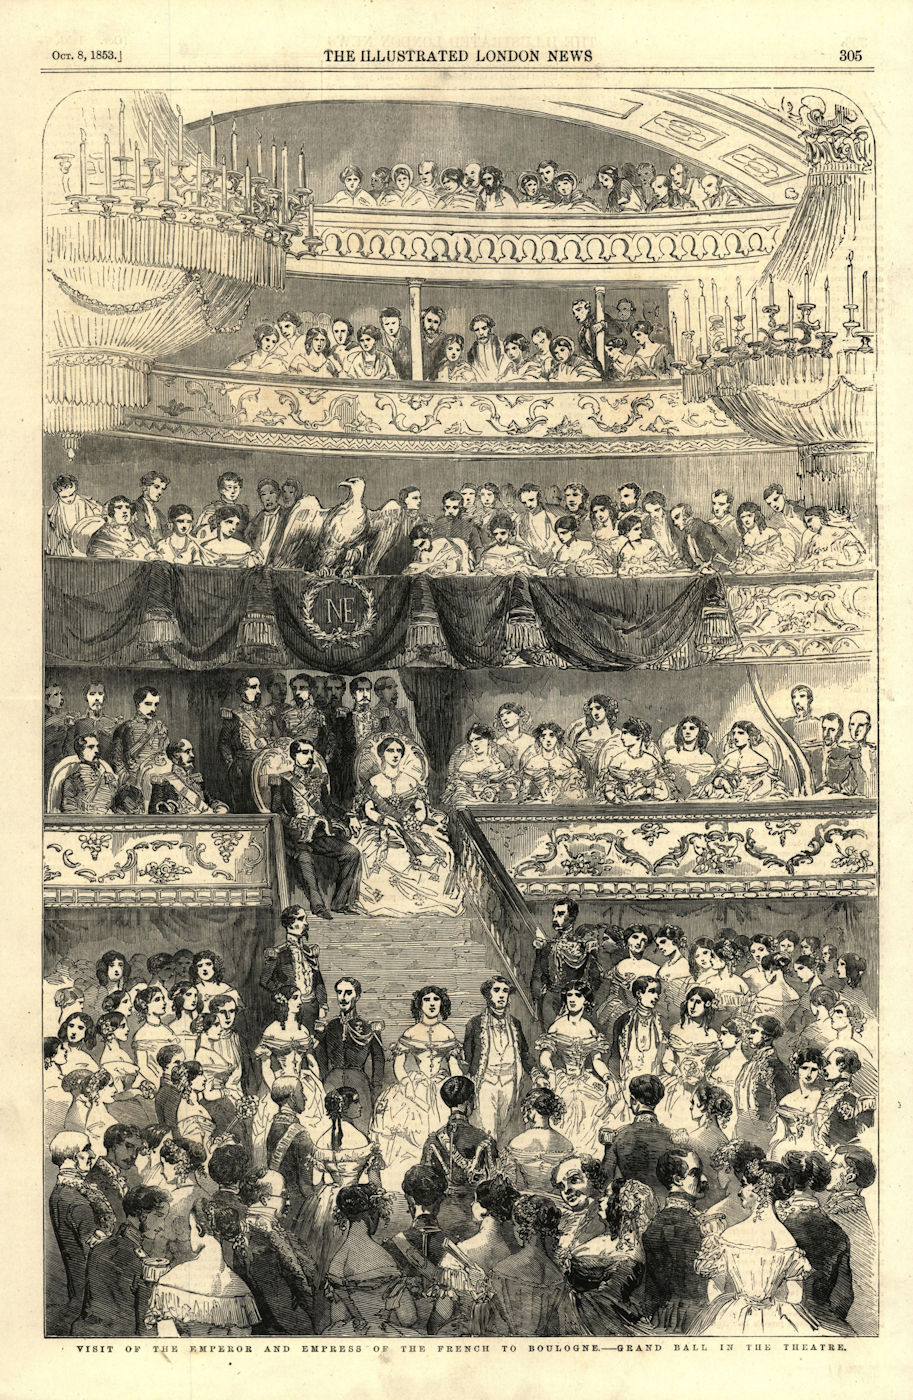 Associate Product French Emperor in Boulogne - grand ball in the theatre 1853 antique ILN page